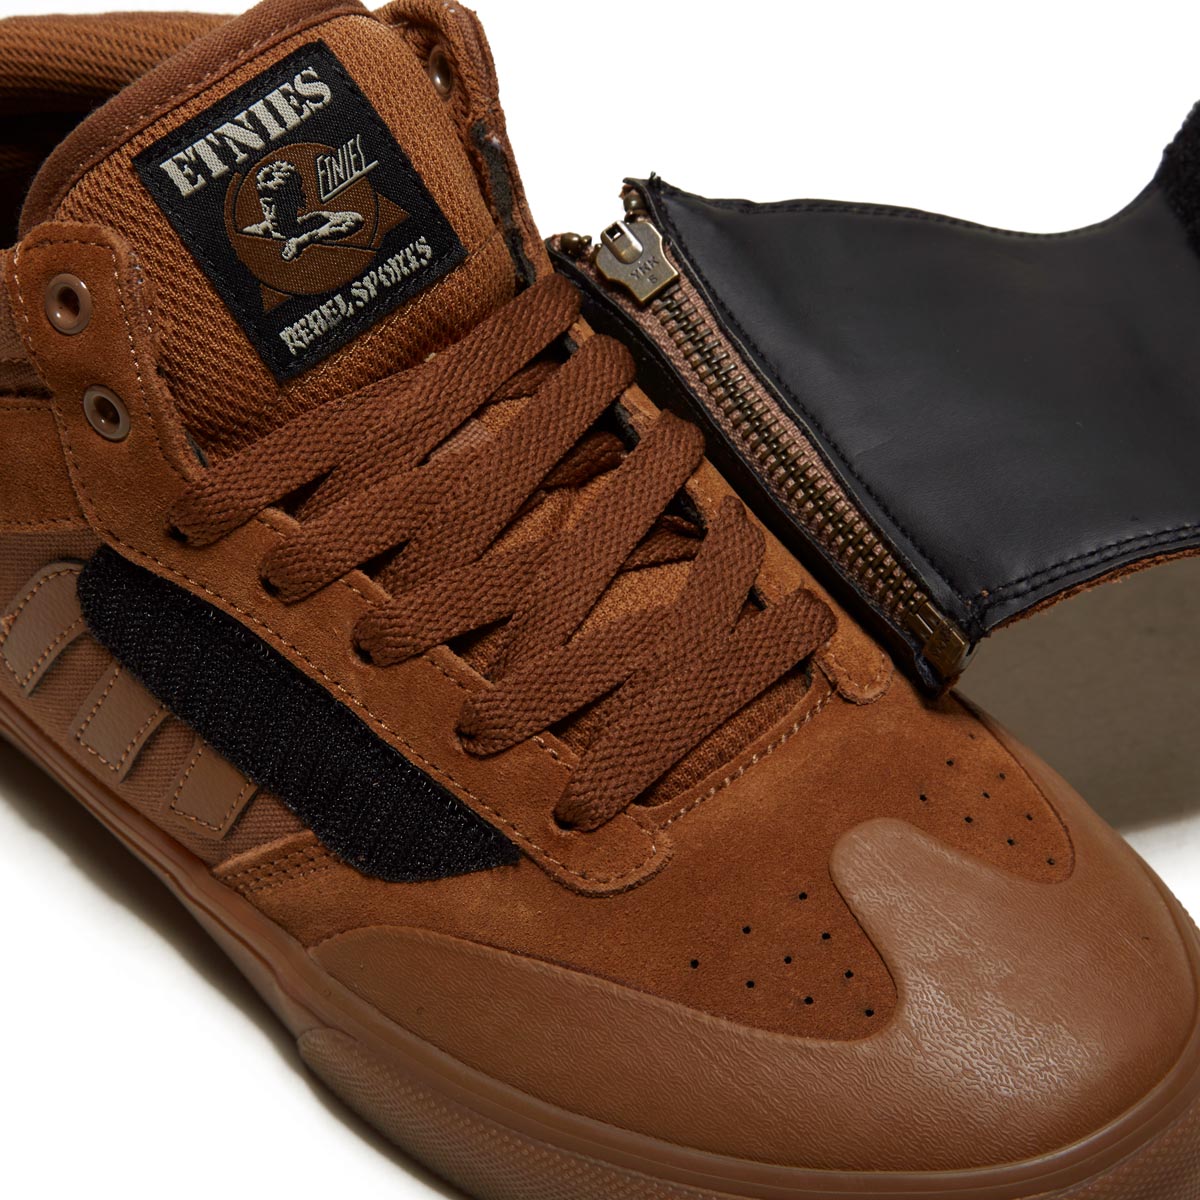 Etnies Windrow Vulc Mid Shoes - Brown/Gum image 5